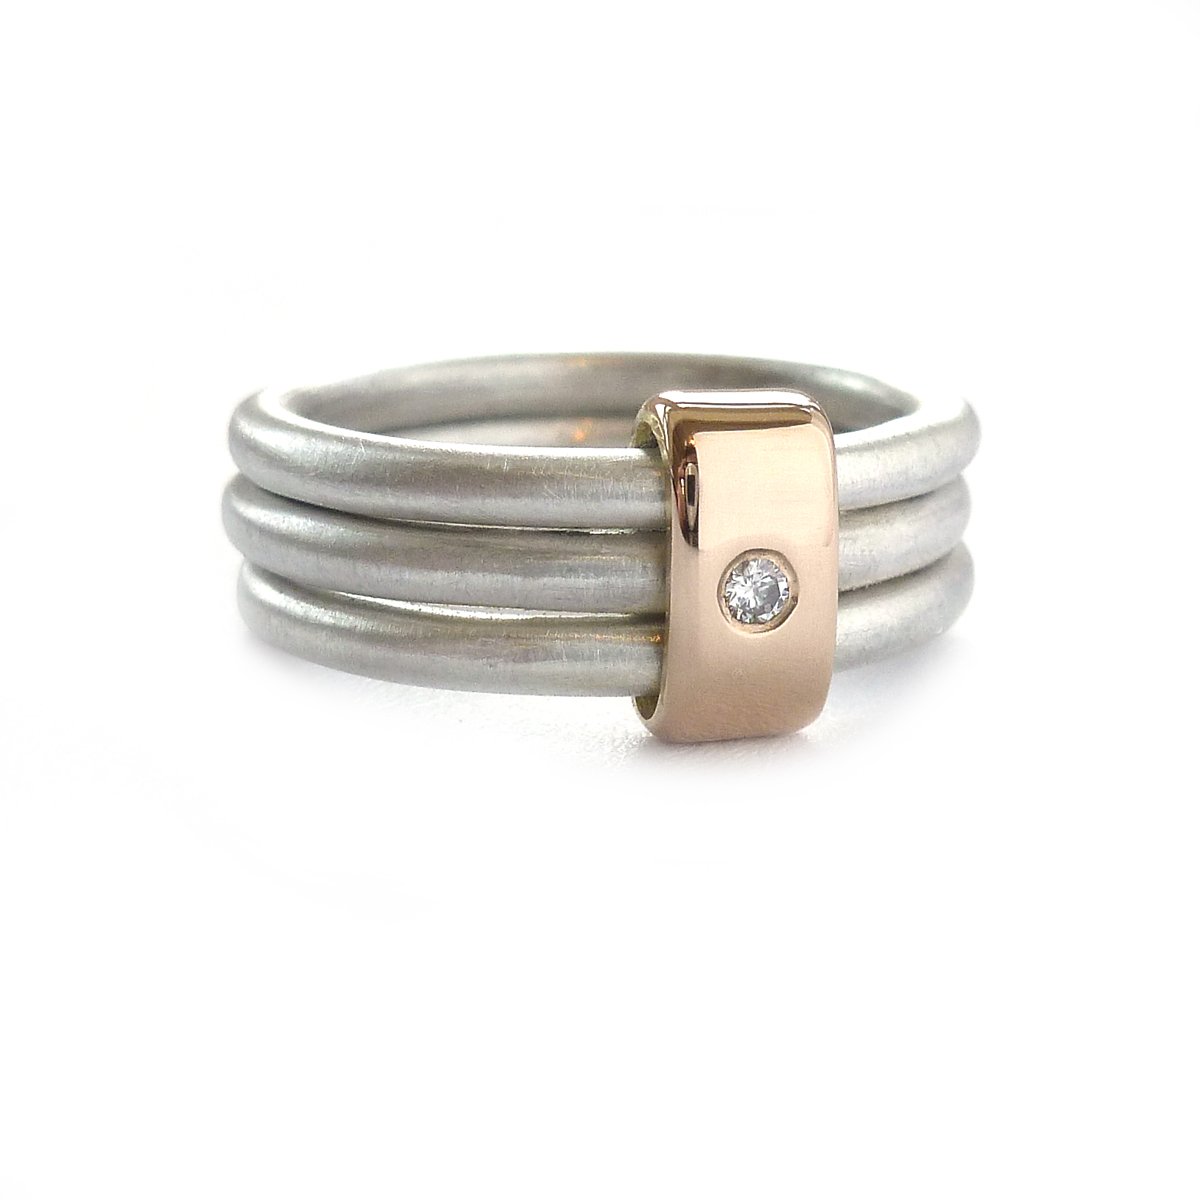 Sue lane, silver, rose gold and diamond ring